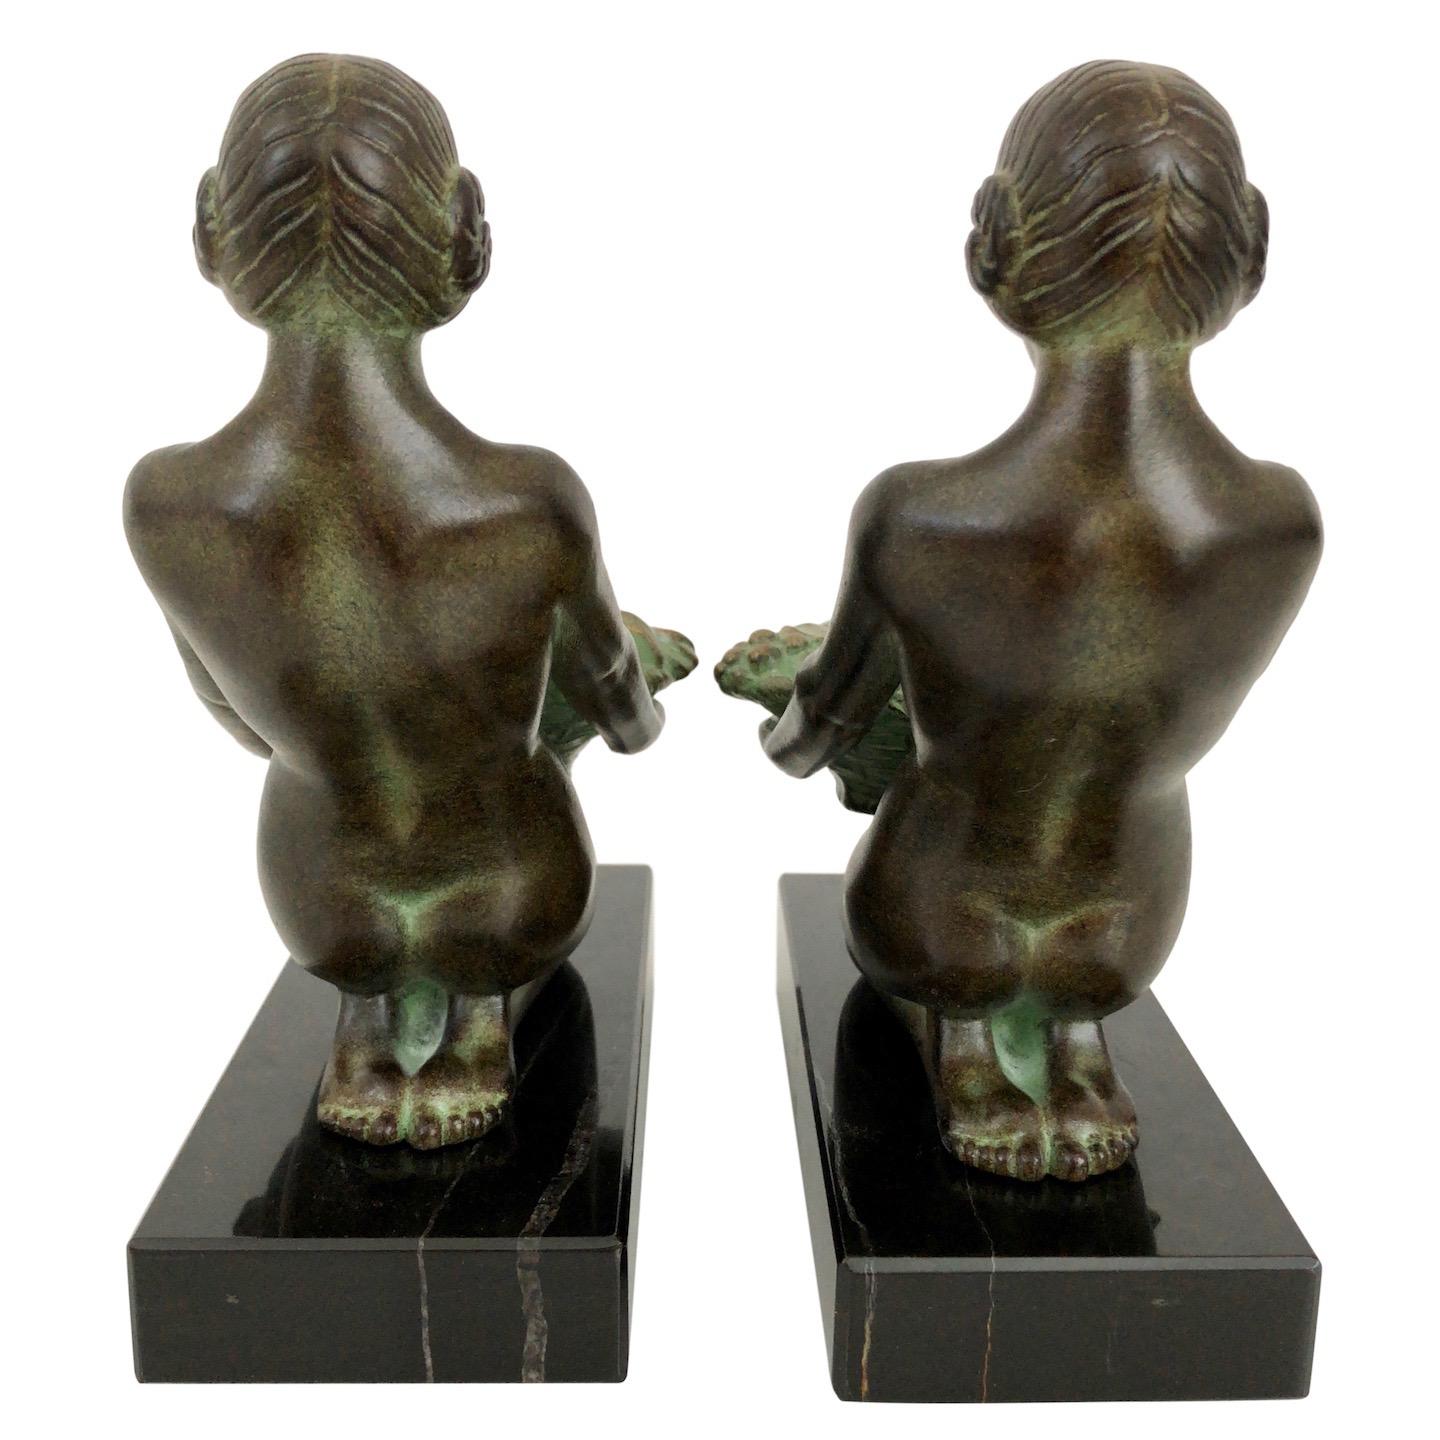 Contemporary Original Max Le Verrier Cueillette Art Deco Style Bookends in Spelter and Marble For Sale